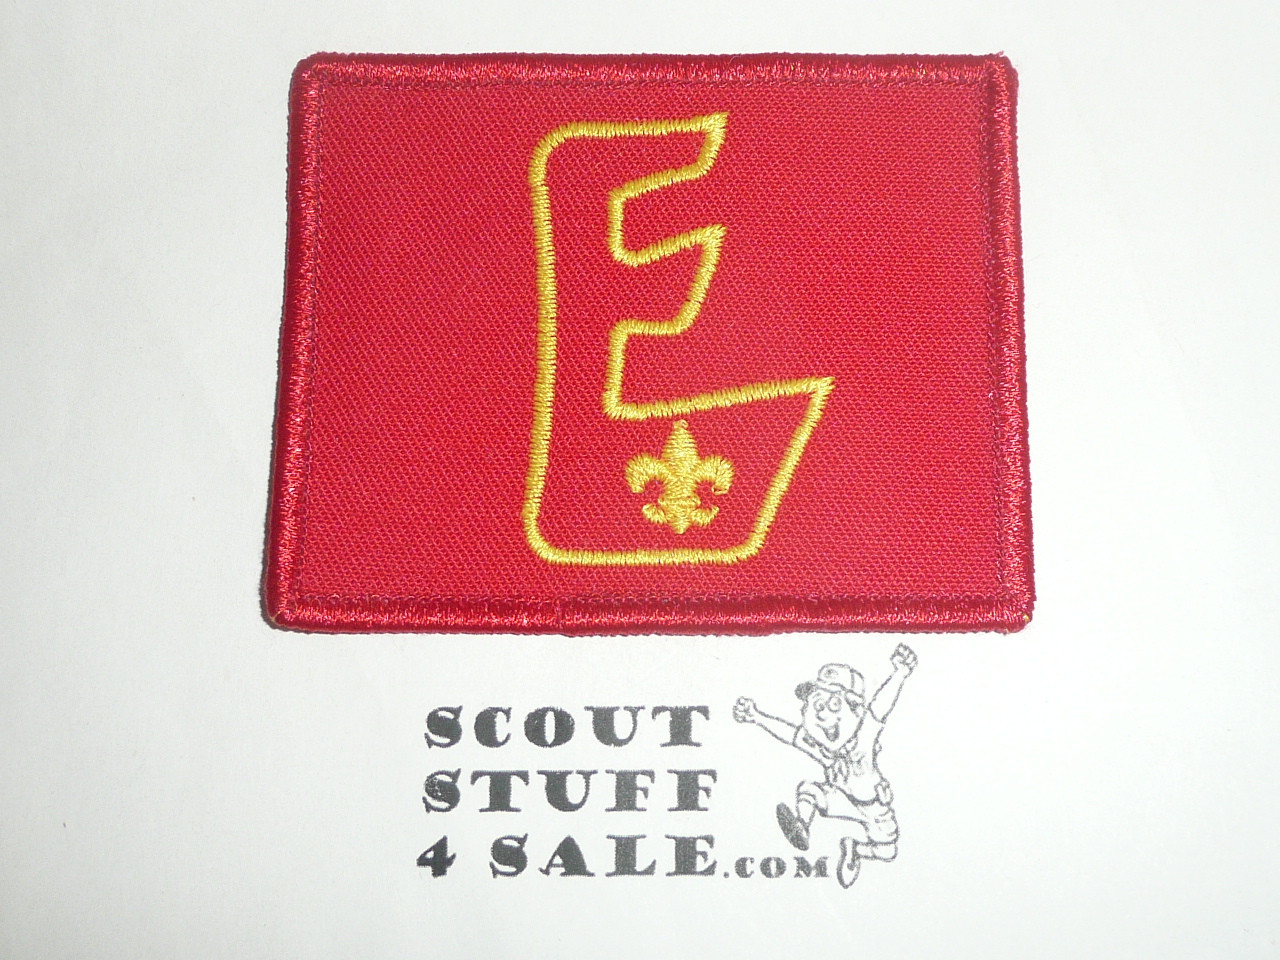 Explorer Scout Universal Emblem from the 1980's in Red with border, fdl